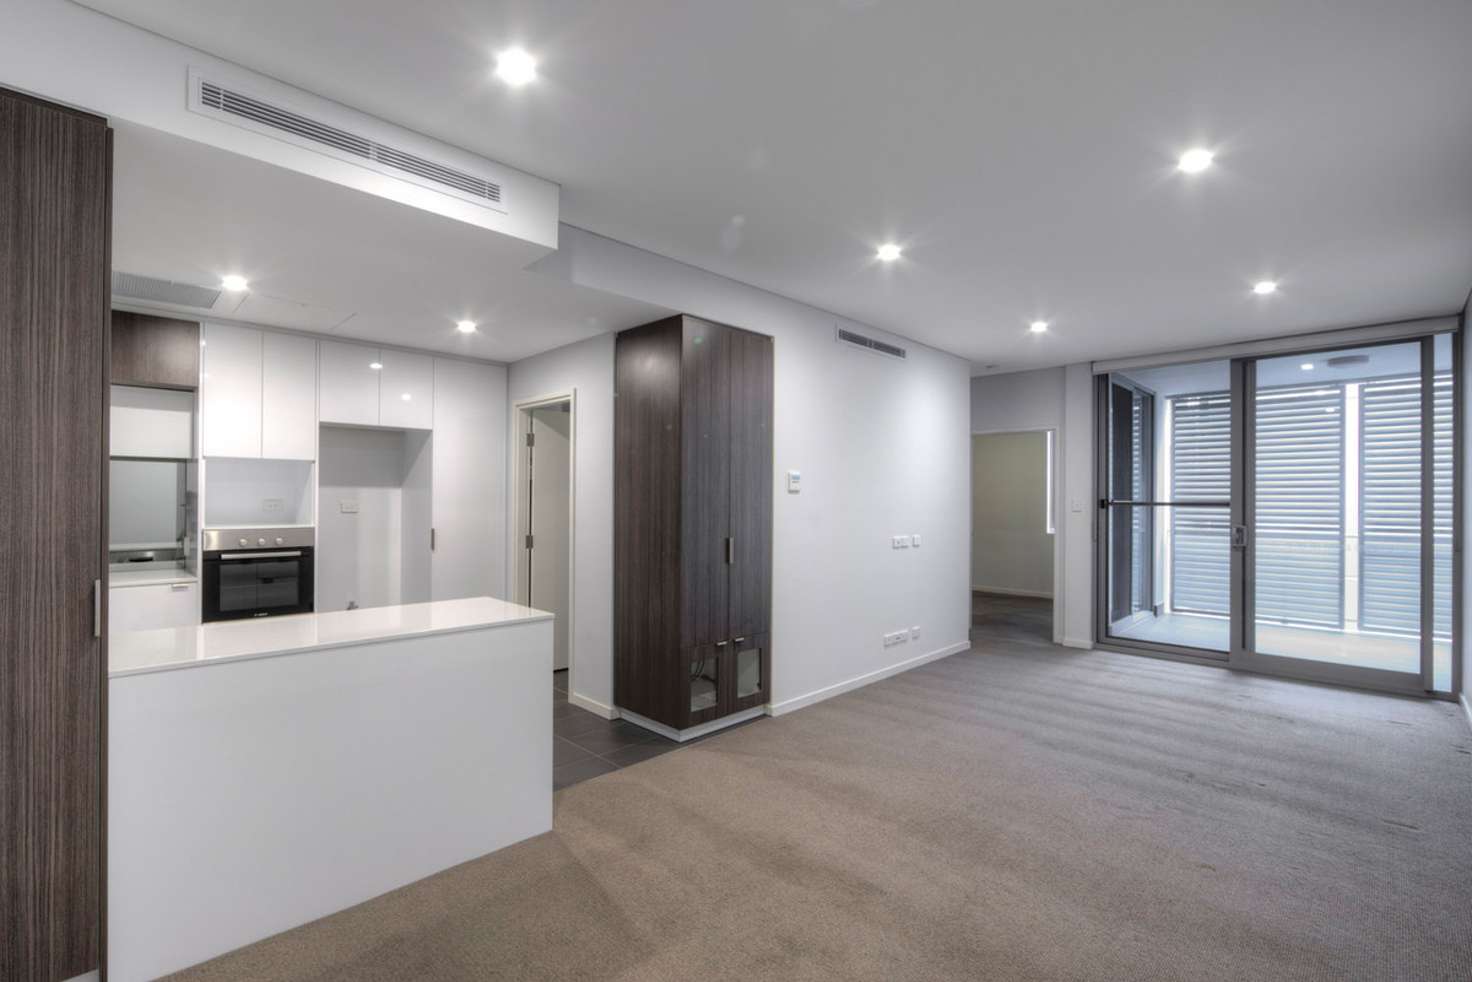 Main view of Homely apartment listing, 317/15-17 Roydhouse Street, Subiaco WA 6008